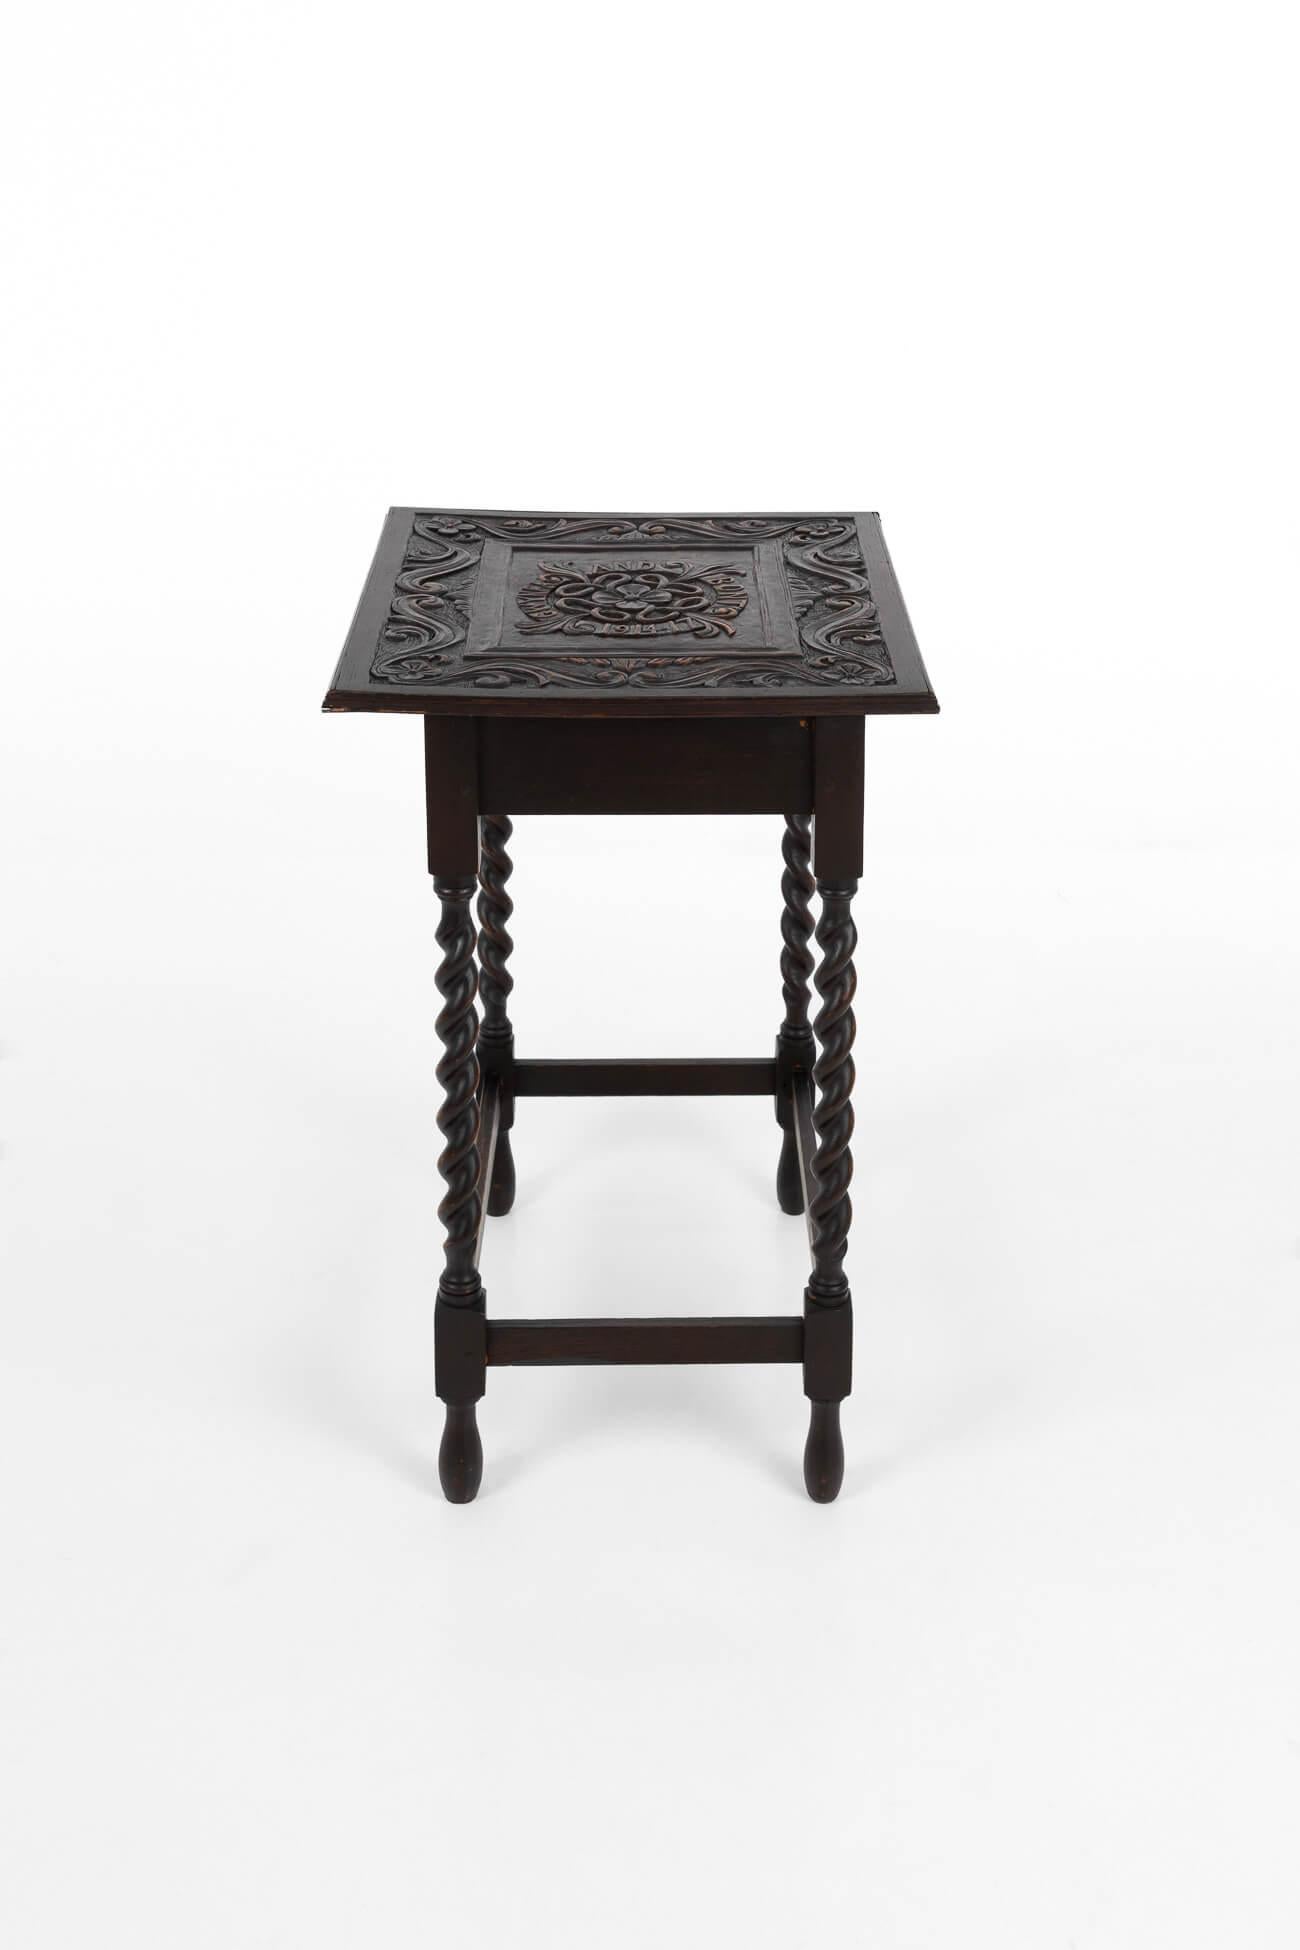 British Early 20th Century Welsh Barley Twist Occasional Table, circa 1918